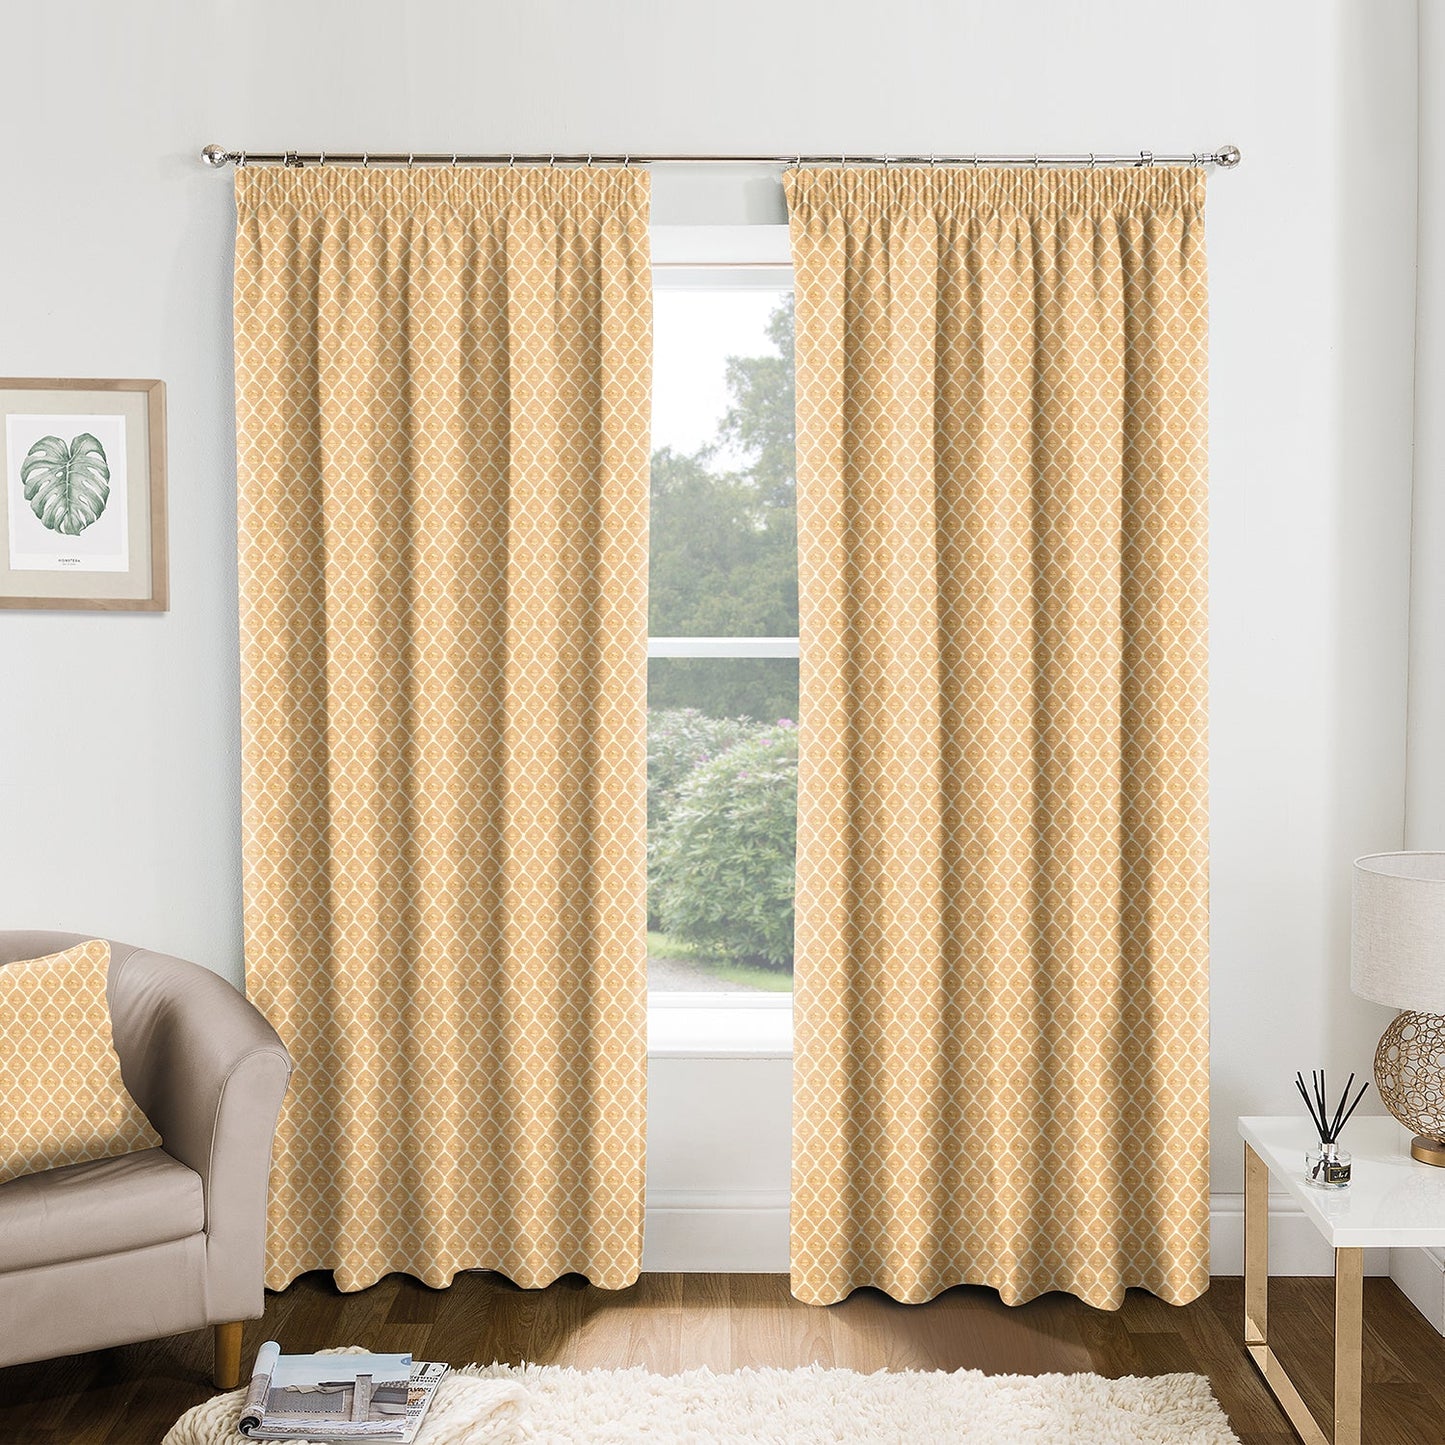 Sicily Mocha Made to Measure Curtains